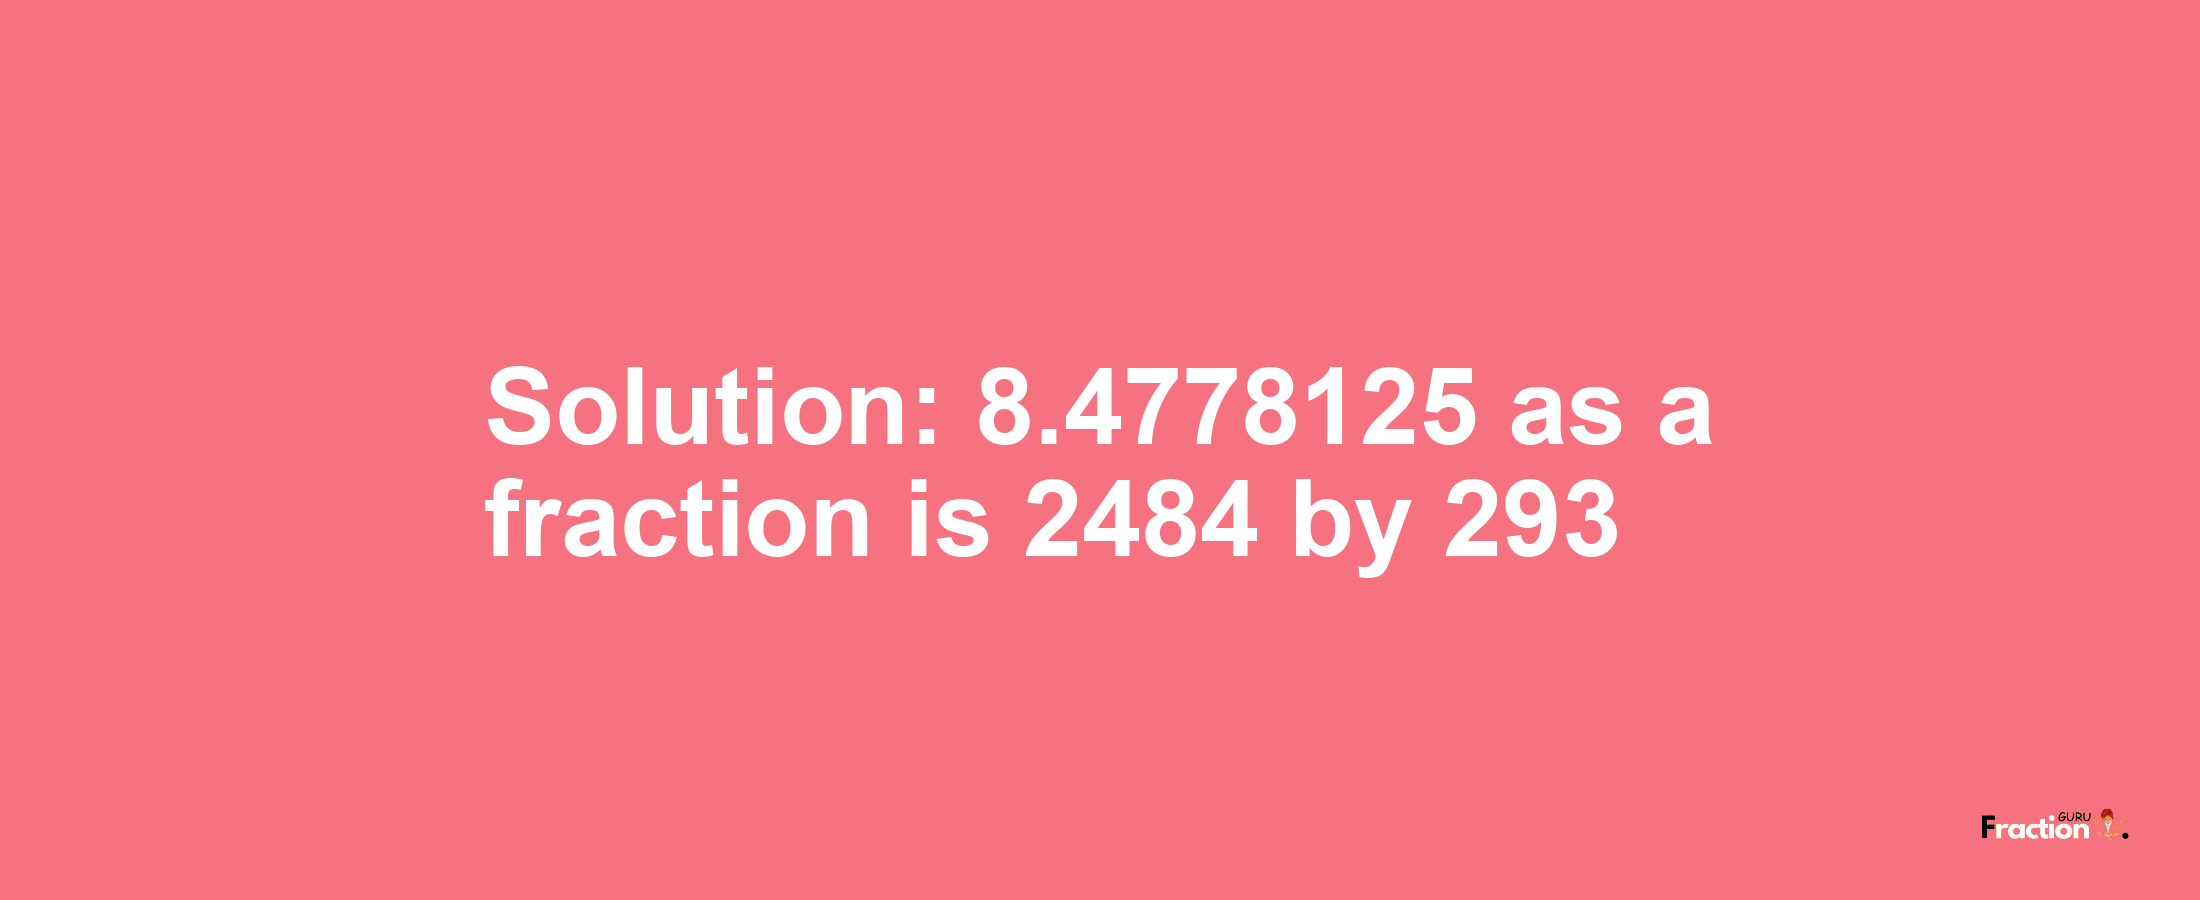 Solution:8.4778125 as a fraction is 2484/293